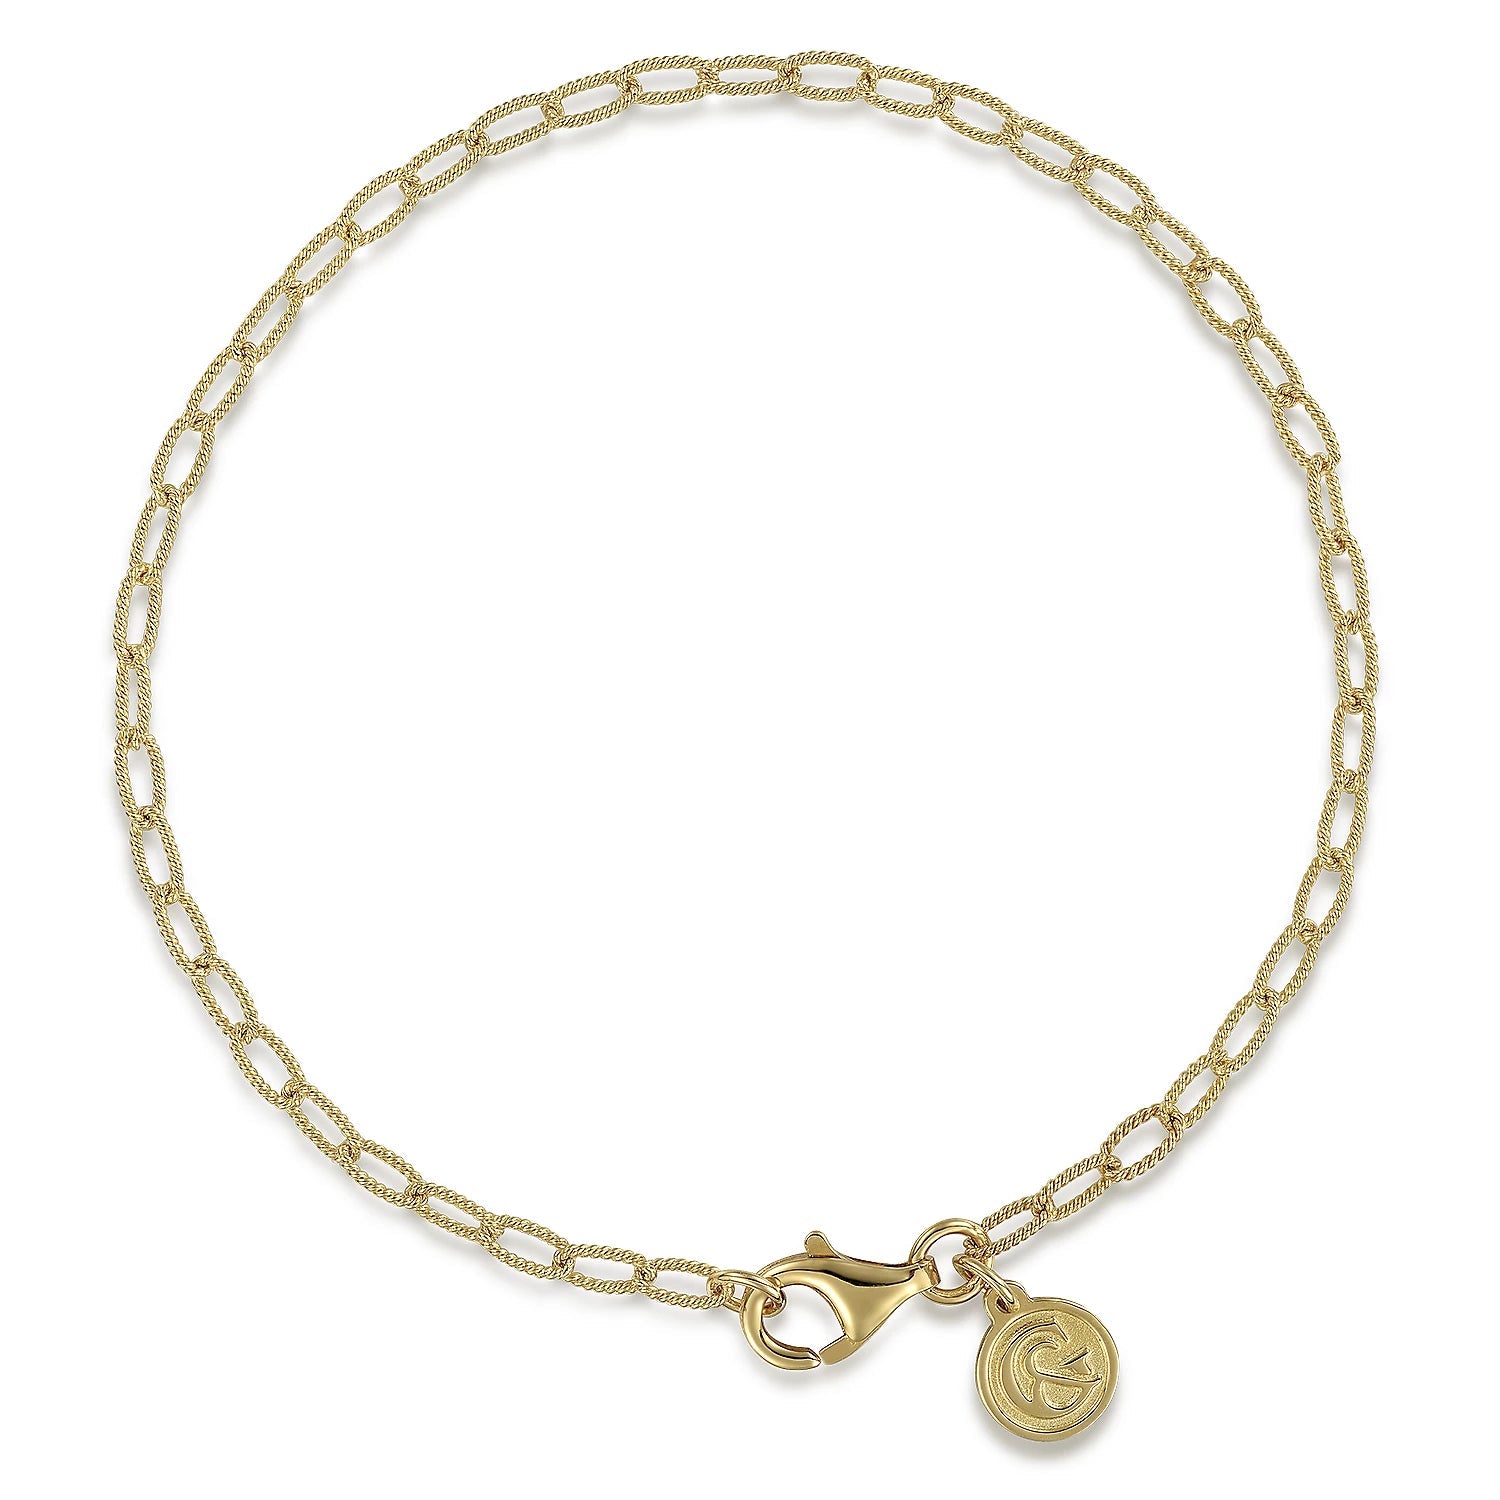 Bracelet oval textured link with disc tag - Gaines Jewelers